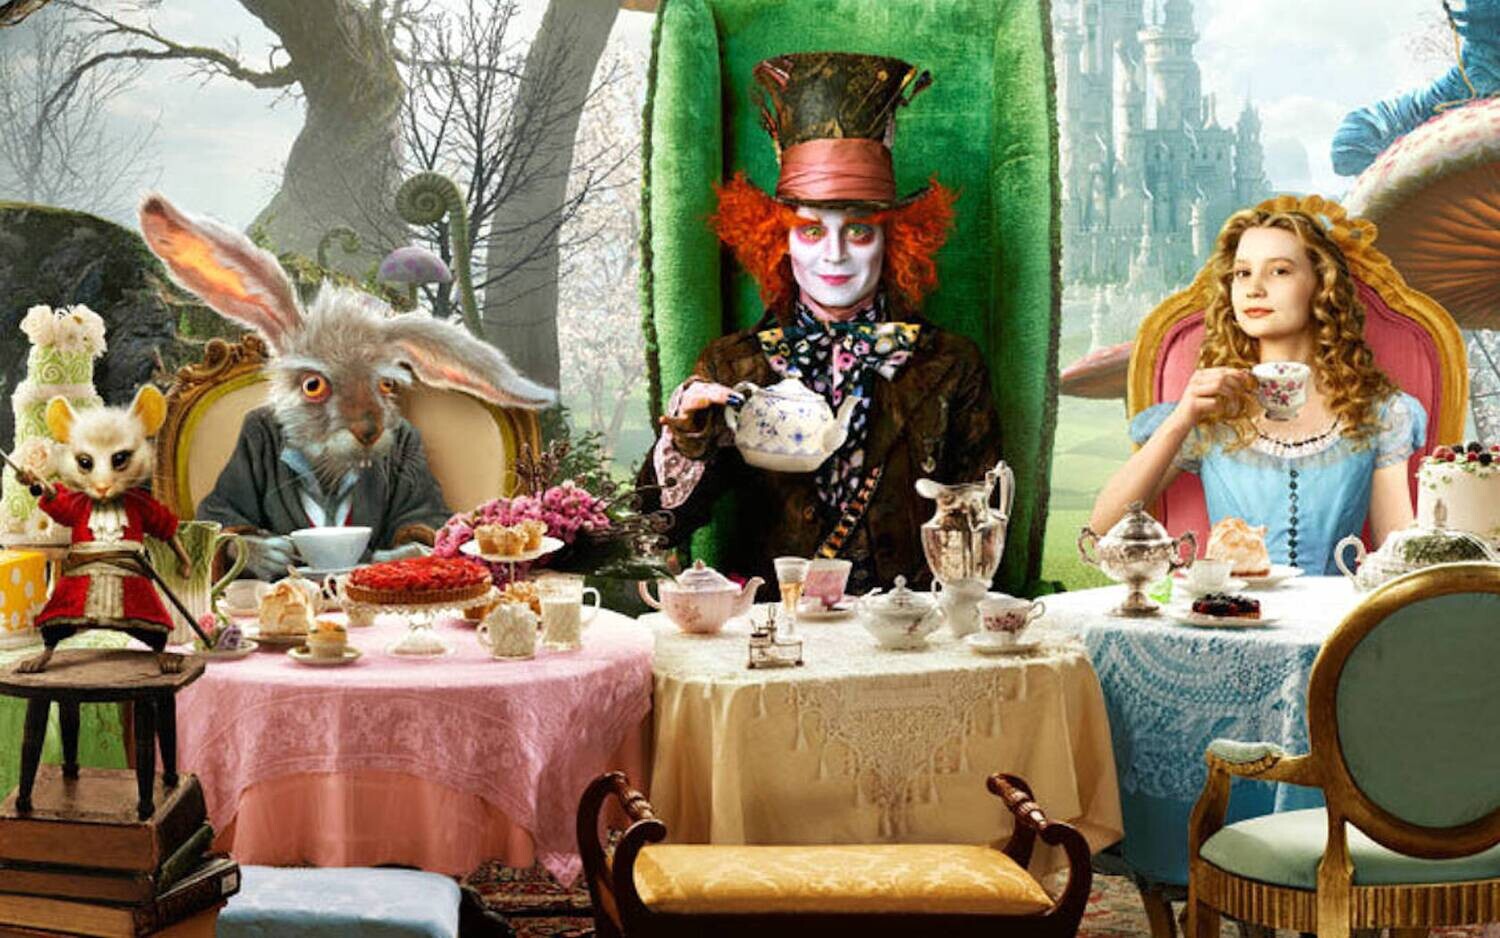 "Mad Hatter" tea party for 2